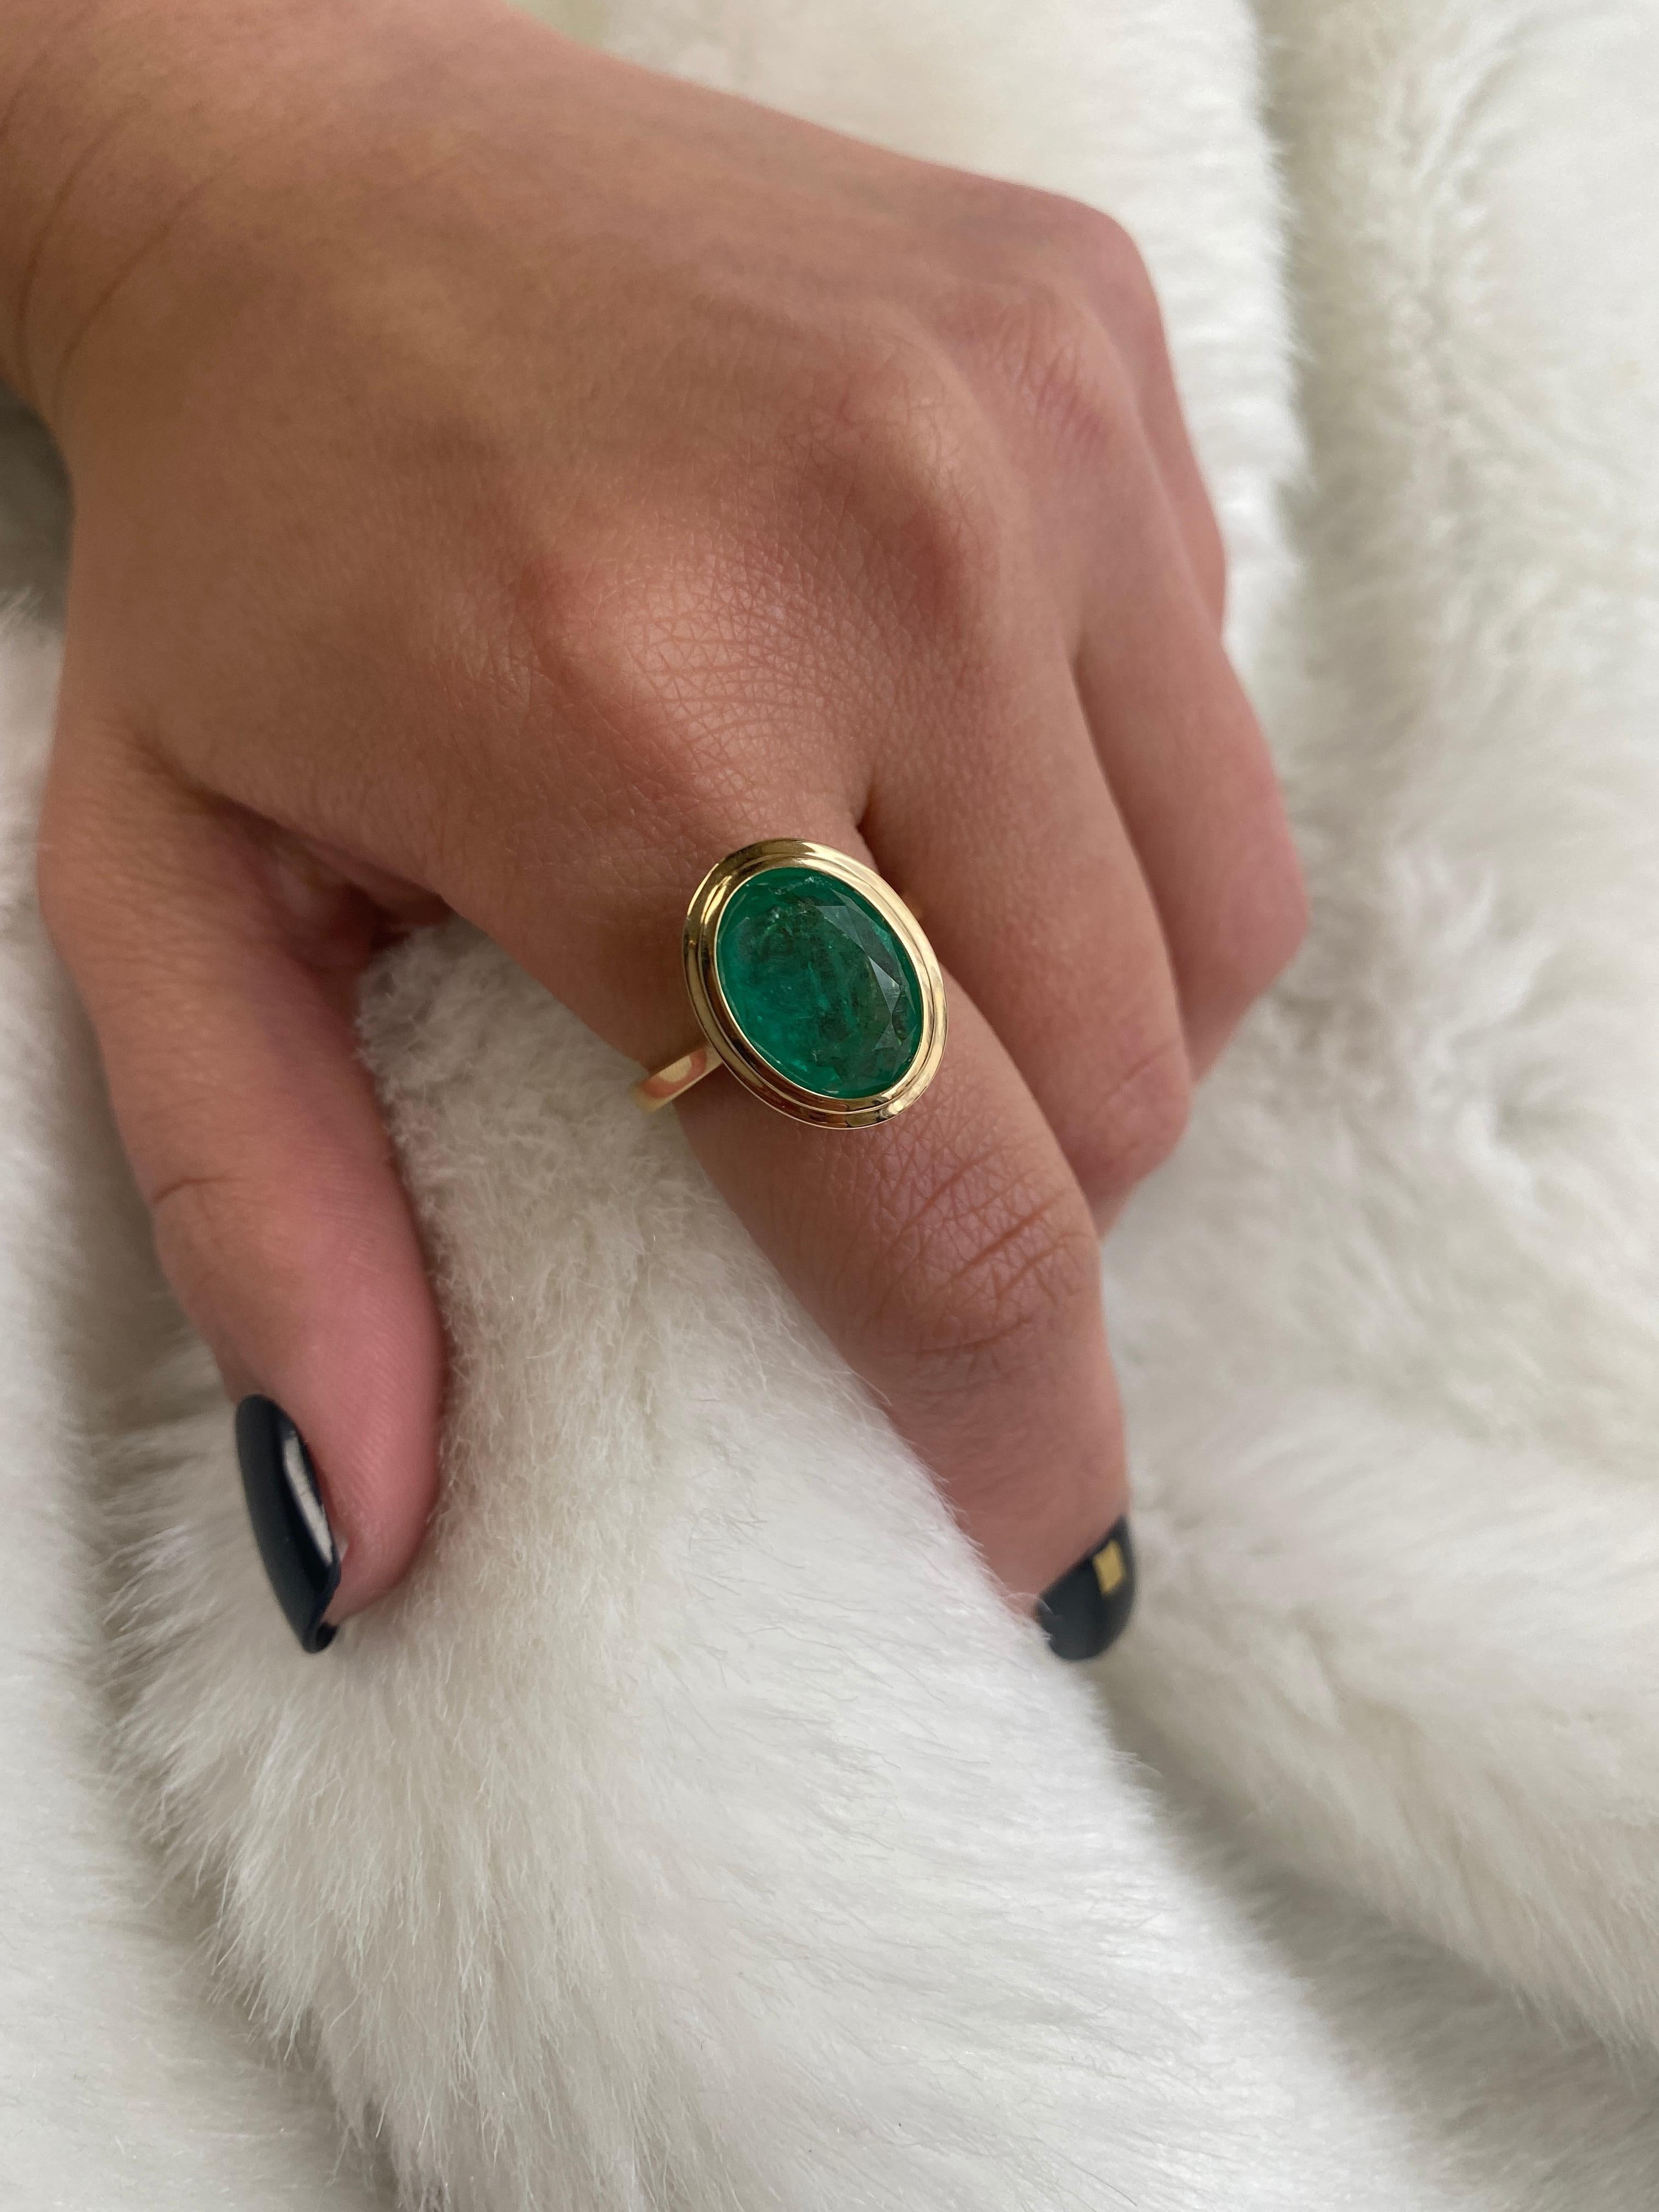 Unique and sophisticated Faceted Oval Emerald Ring in 18K Yellow Gold, from 'G-One' Collection

* Gemstone: 100% Earth Mined 
* Approx. gemstone Weight: 5.68 Carats (Emerald)

* Cut: Oval
* Metal: 18K Yellow Gold